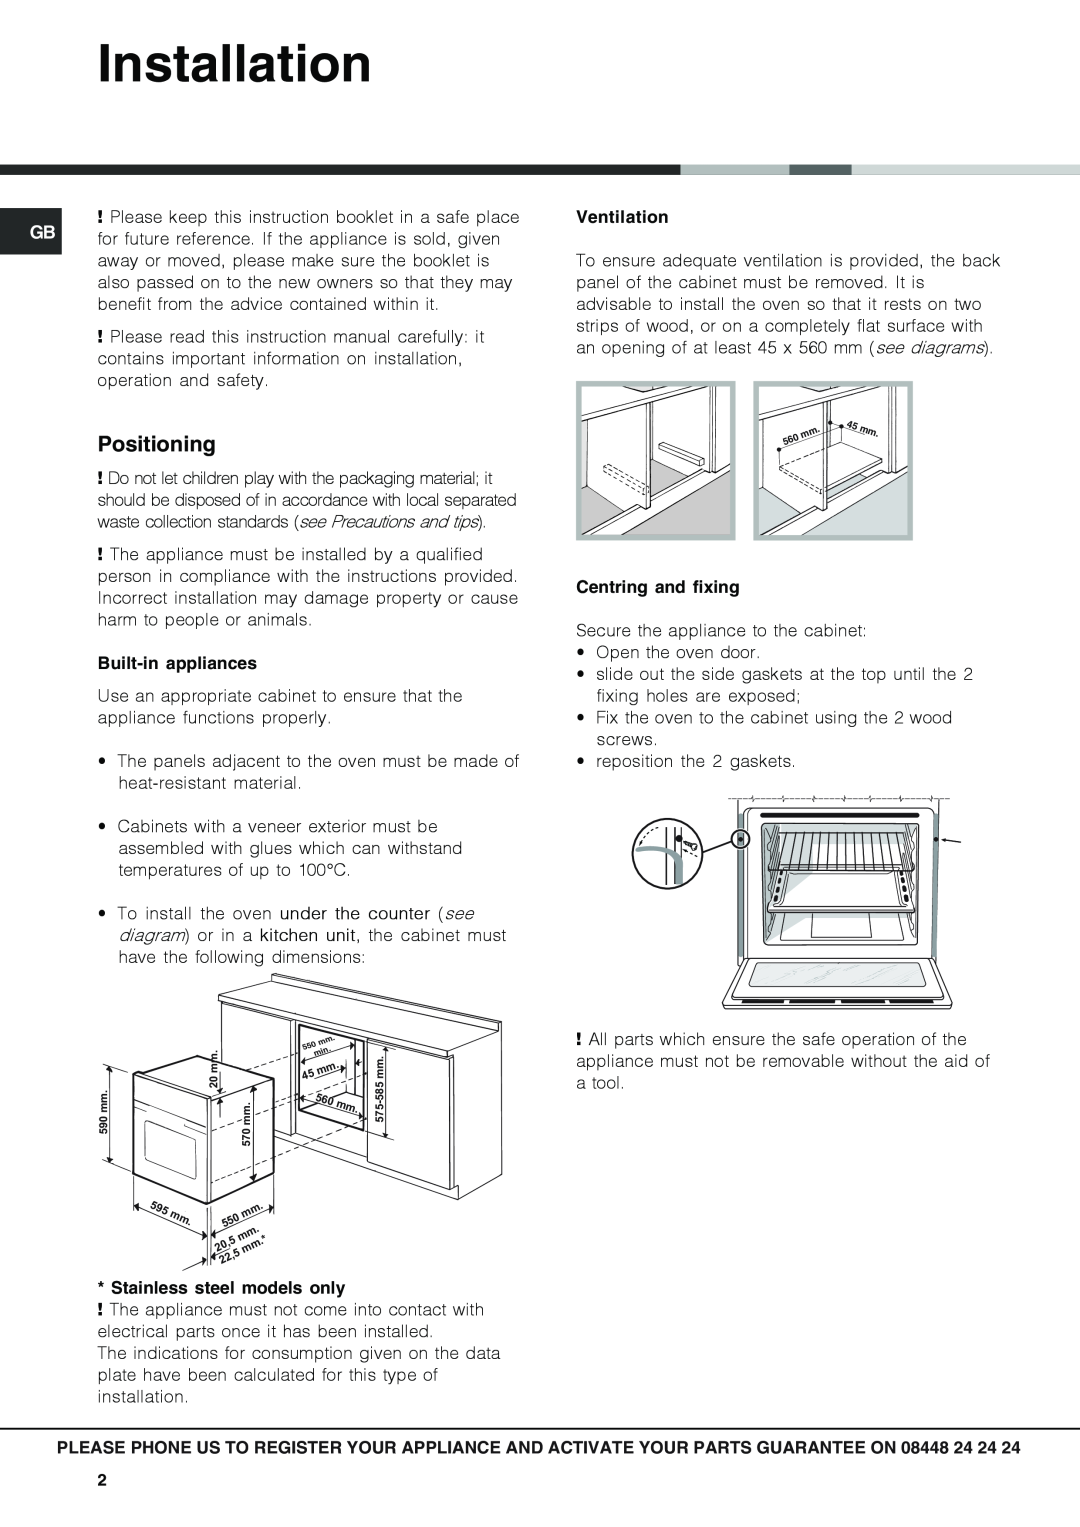 Hotpoint SX1046L PX, SX 1046Q PX operating instructions Installation, Positioning 